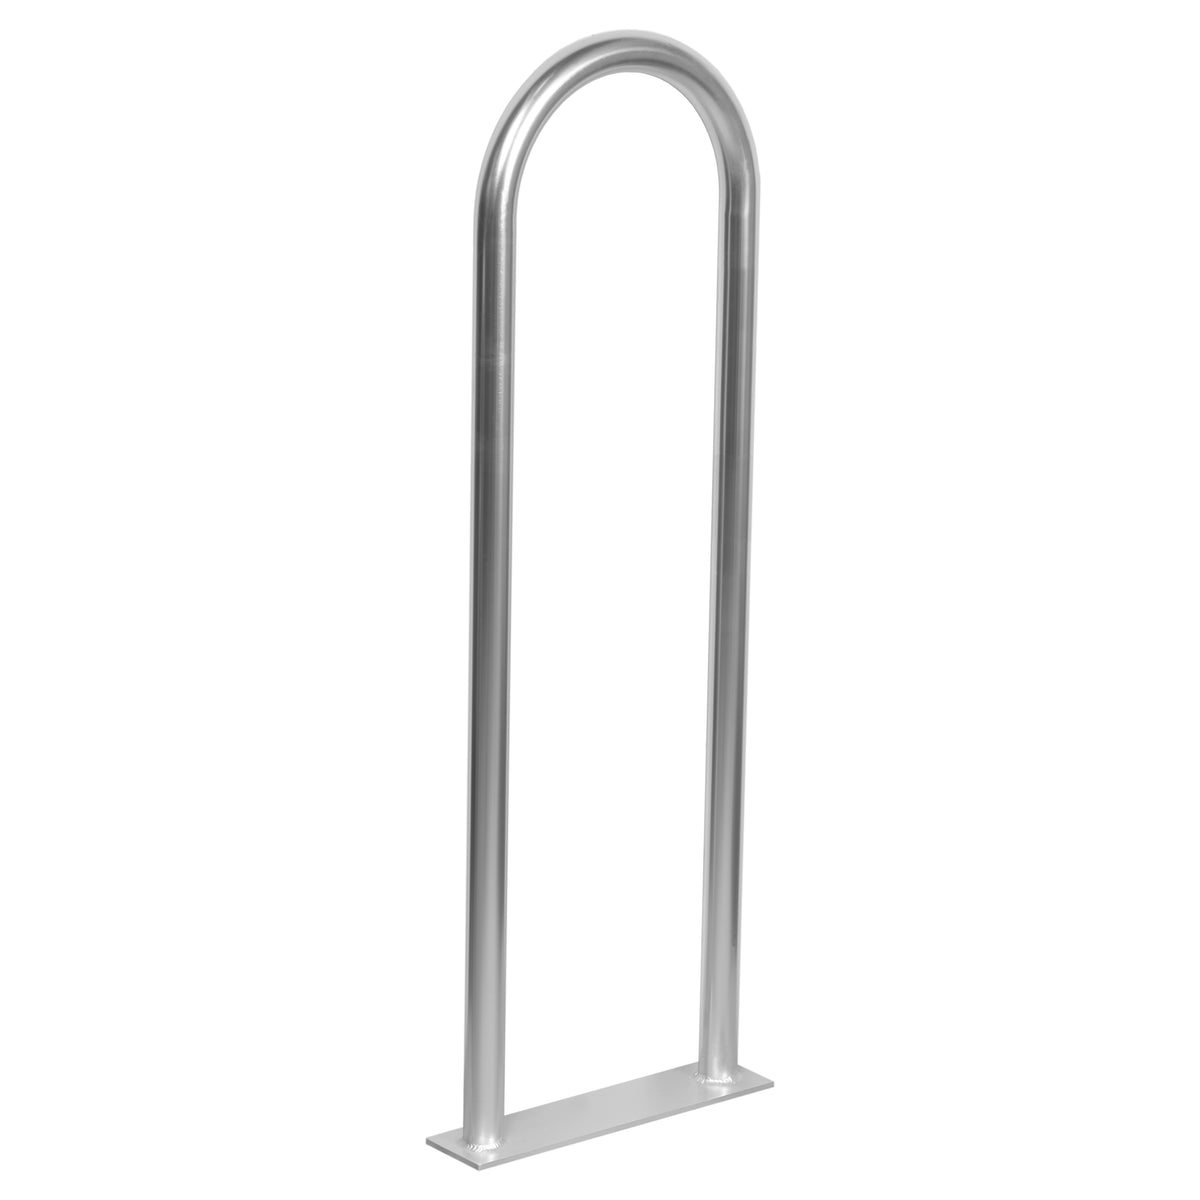 Extreme Max 3006.6915 Universal Aluminum Hand Rail with Base for Pool, Hot Tub, Dock & Deck - 42" H x 13" W